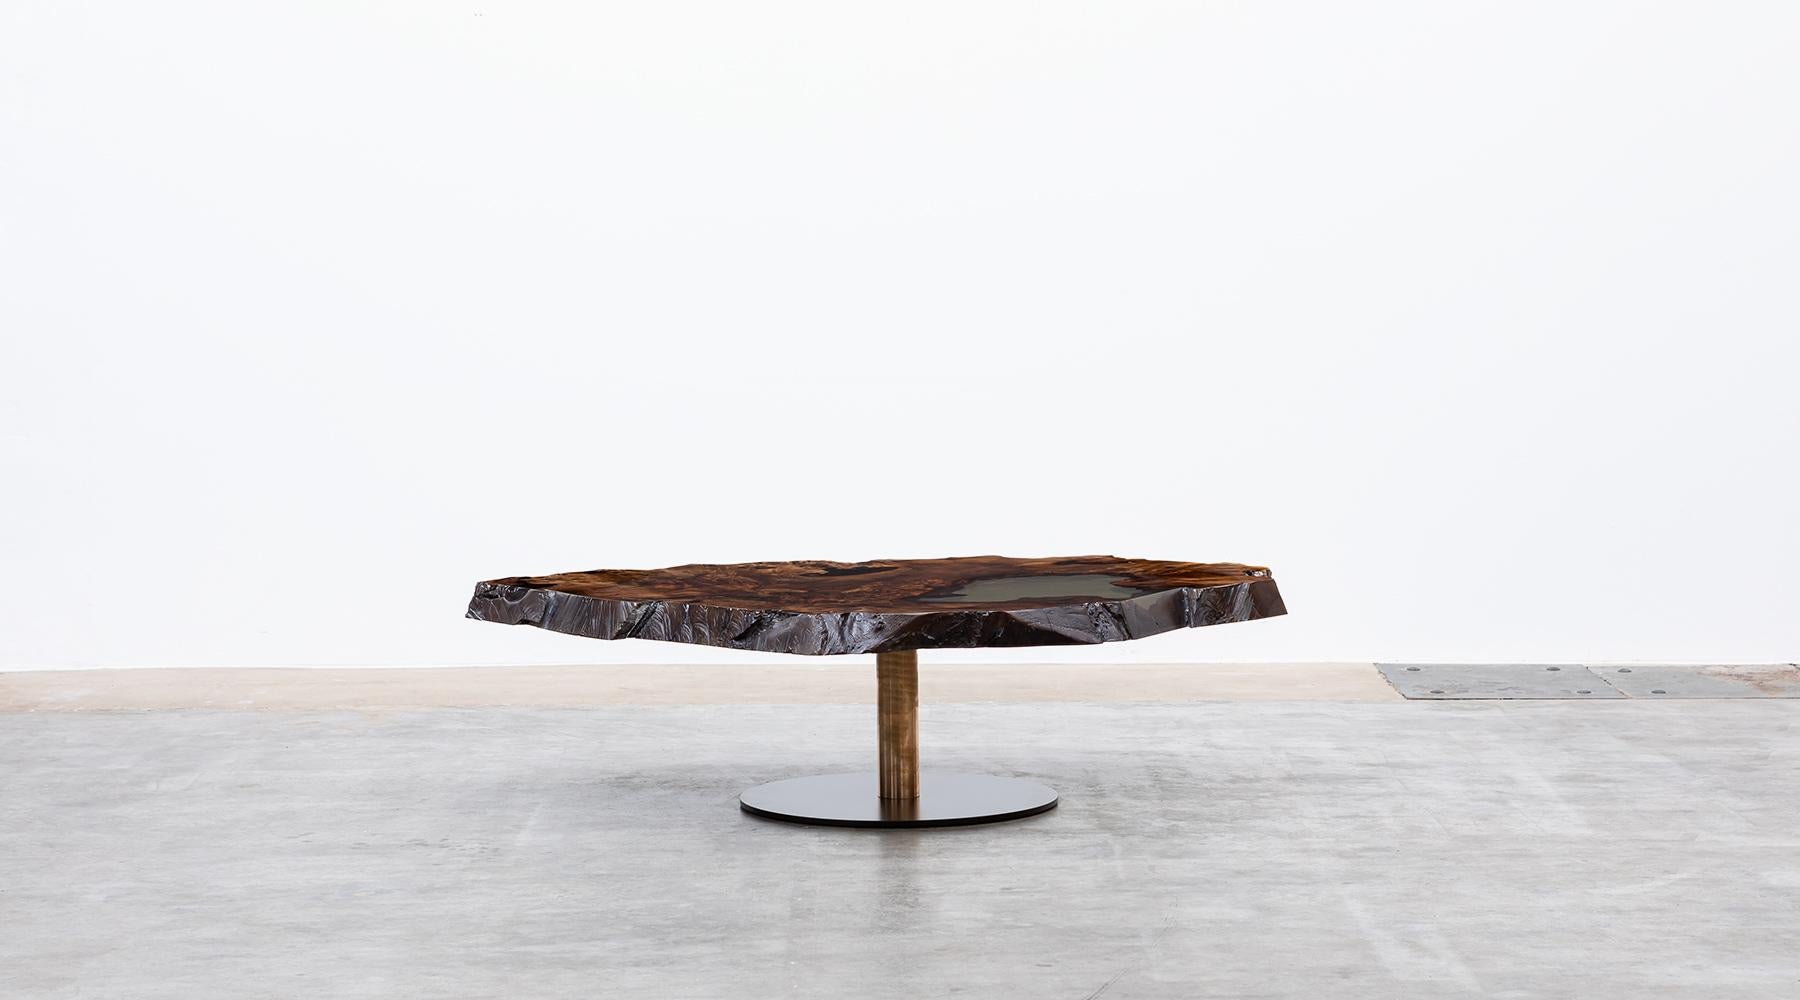 Contemporary Live Edge European Walnut Table by Johannes Hock 'E' In Excellent Condition For Sale In Frankfurt, Hessen, DE